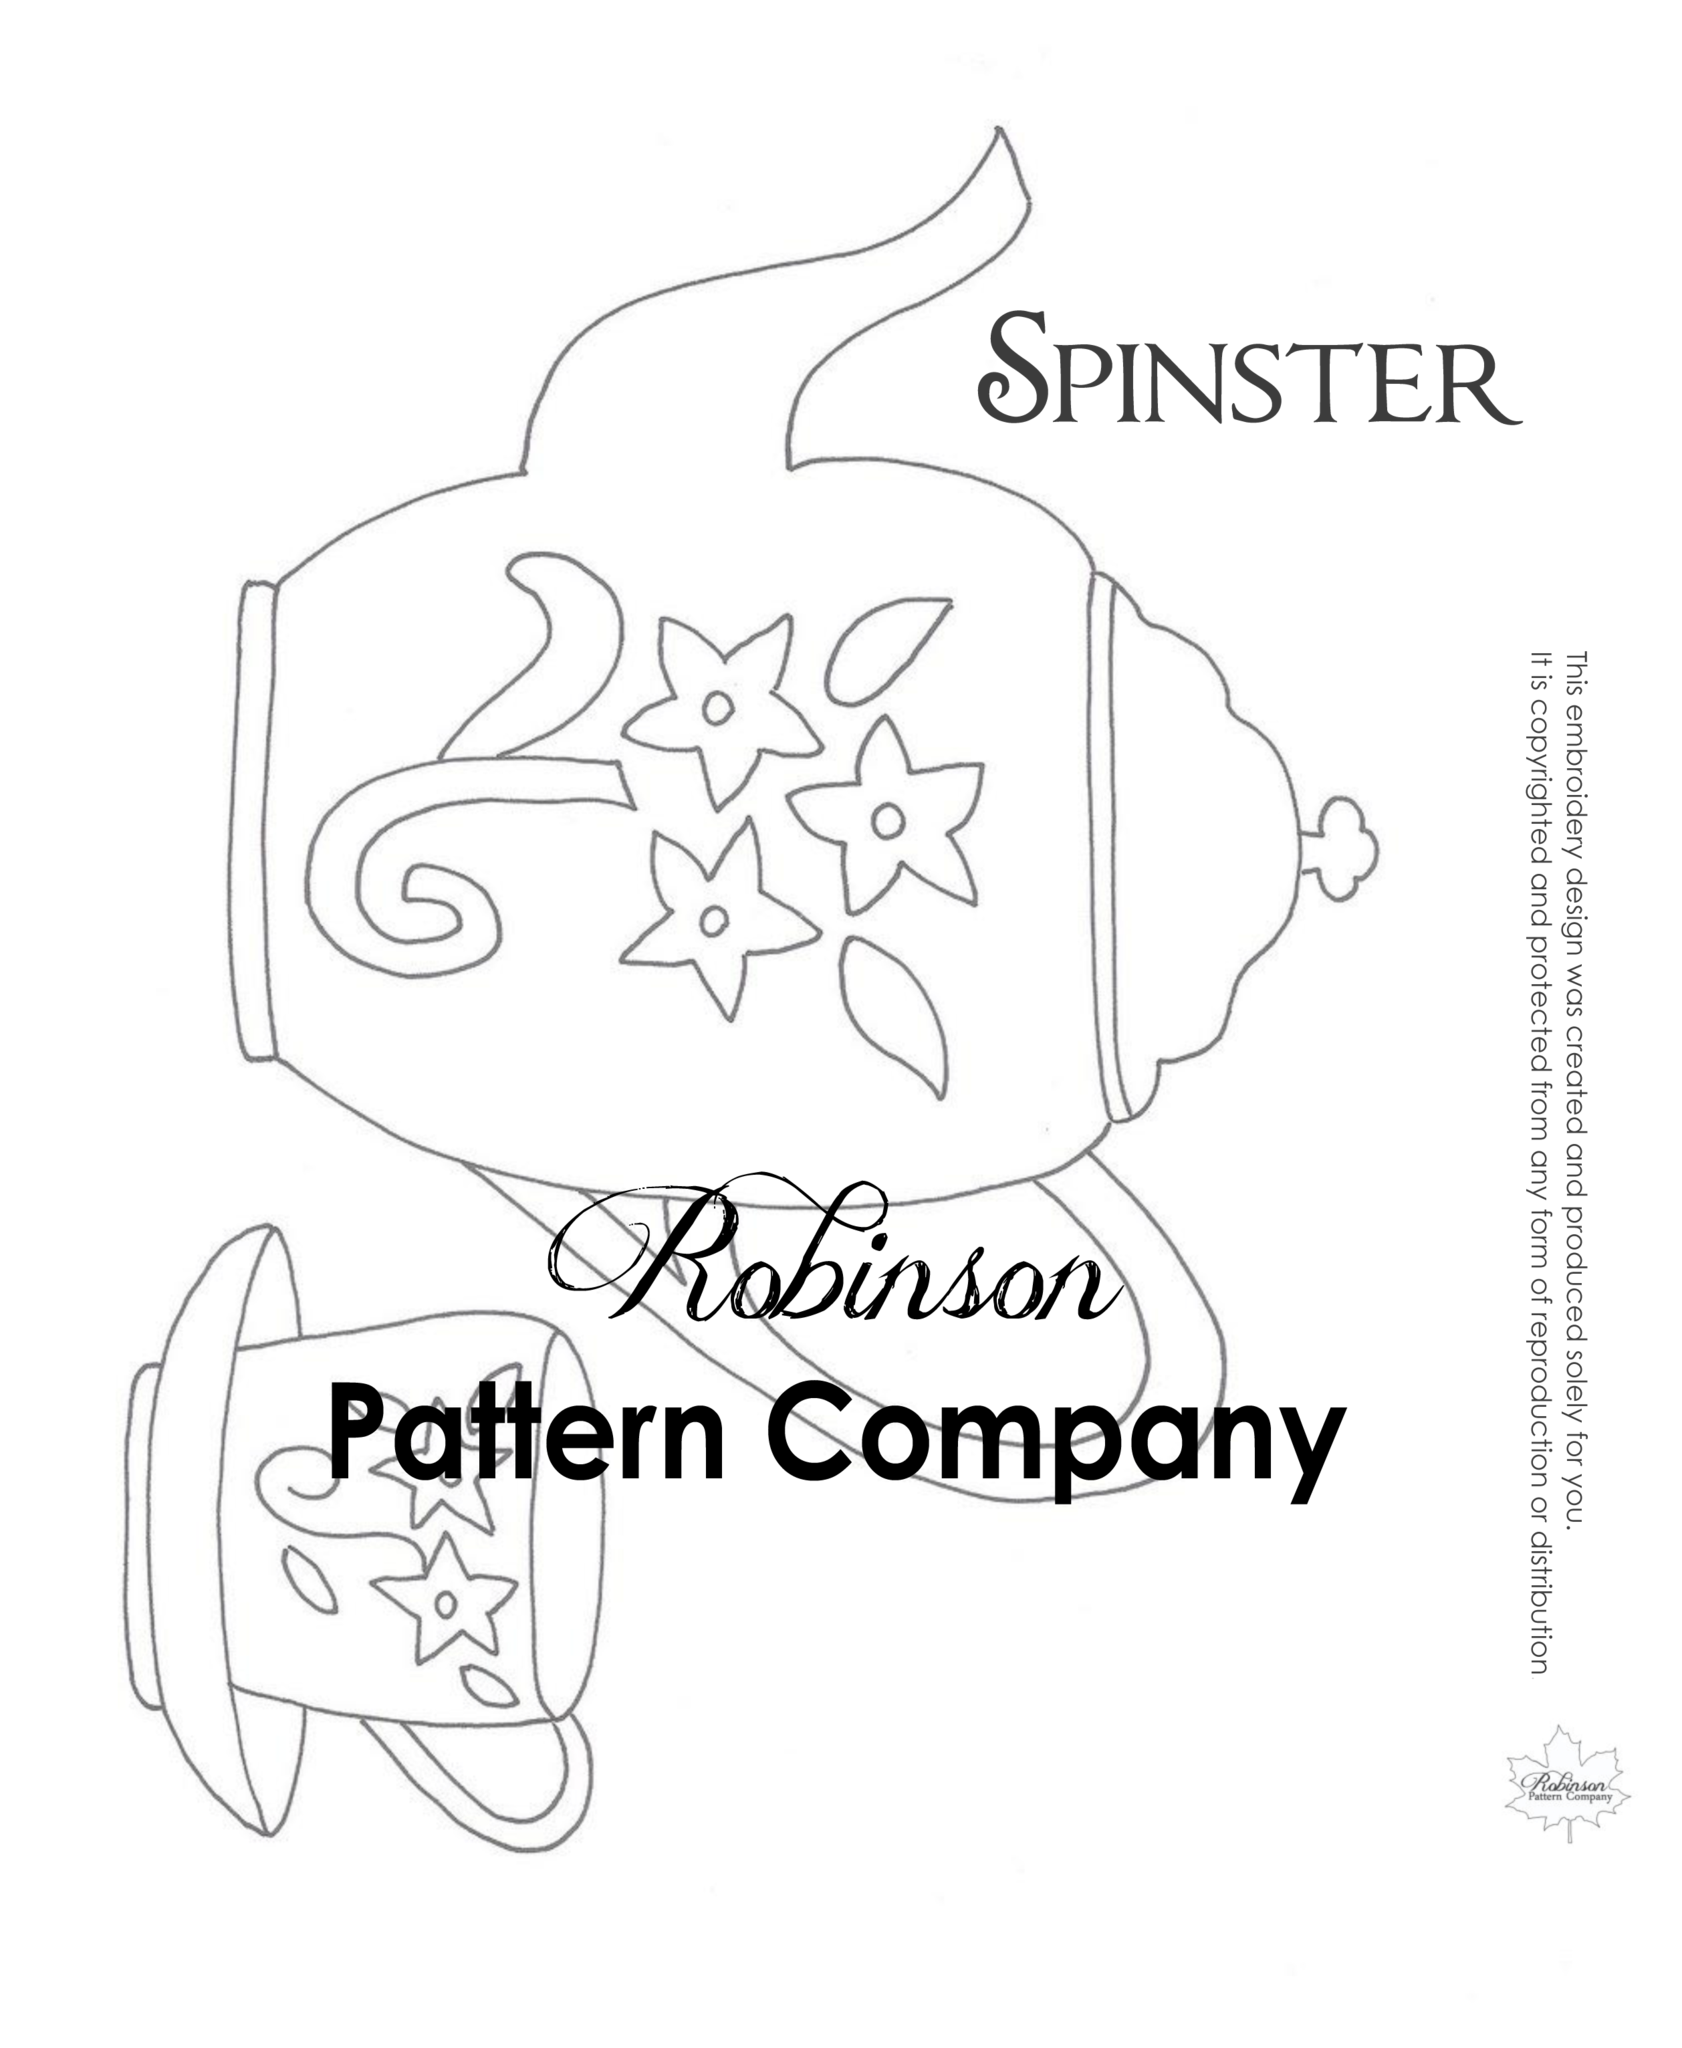 Spinster Hand Embroidery pattern